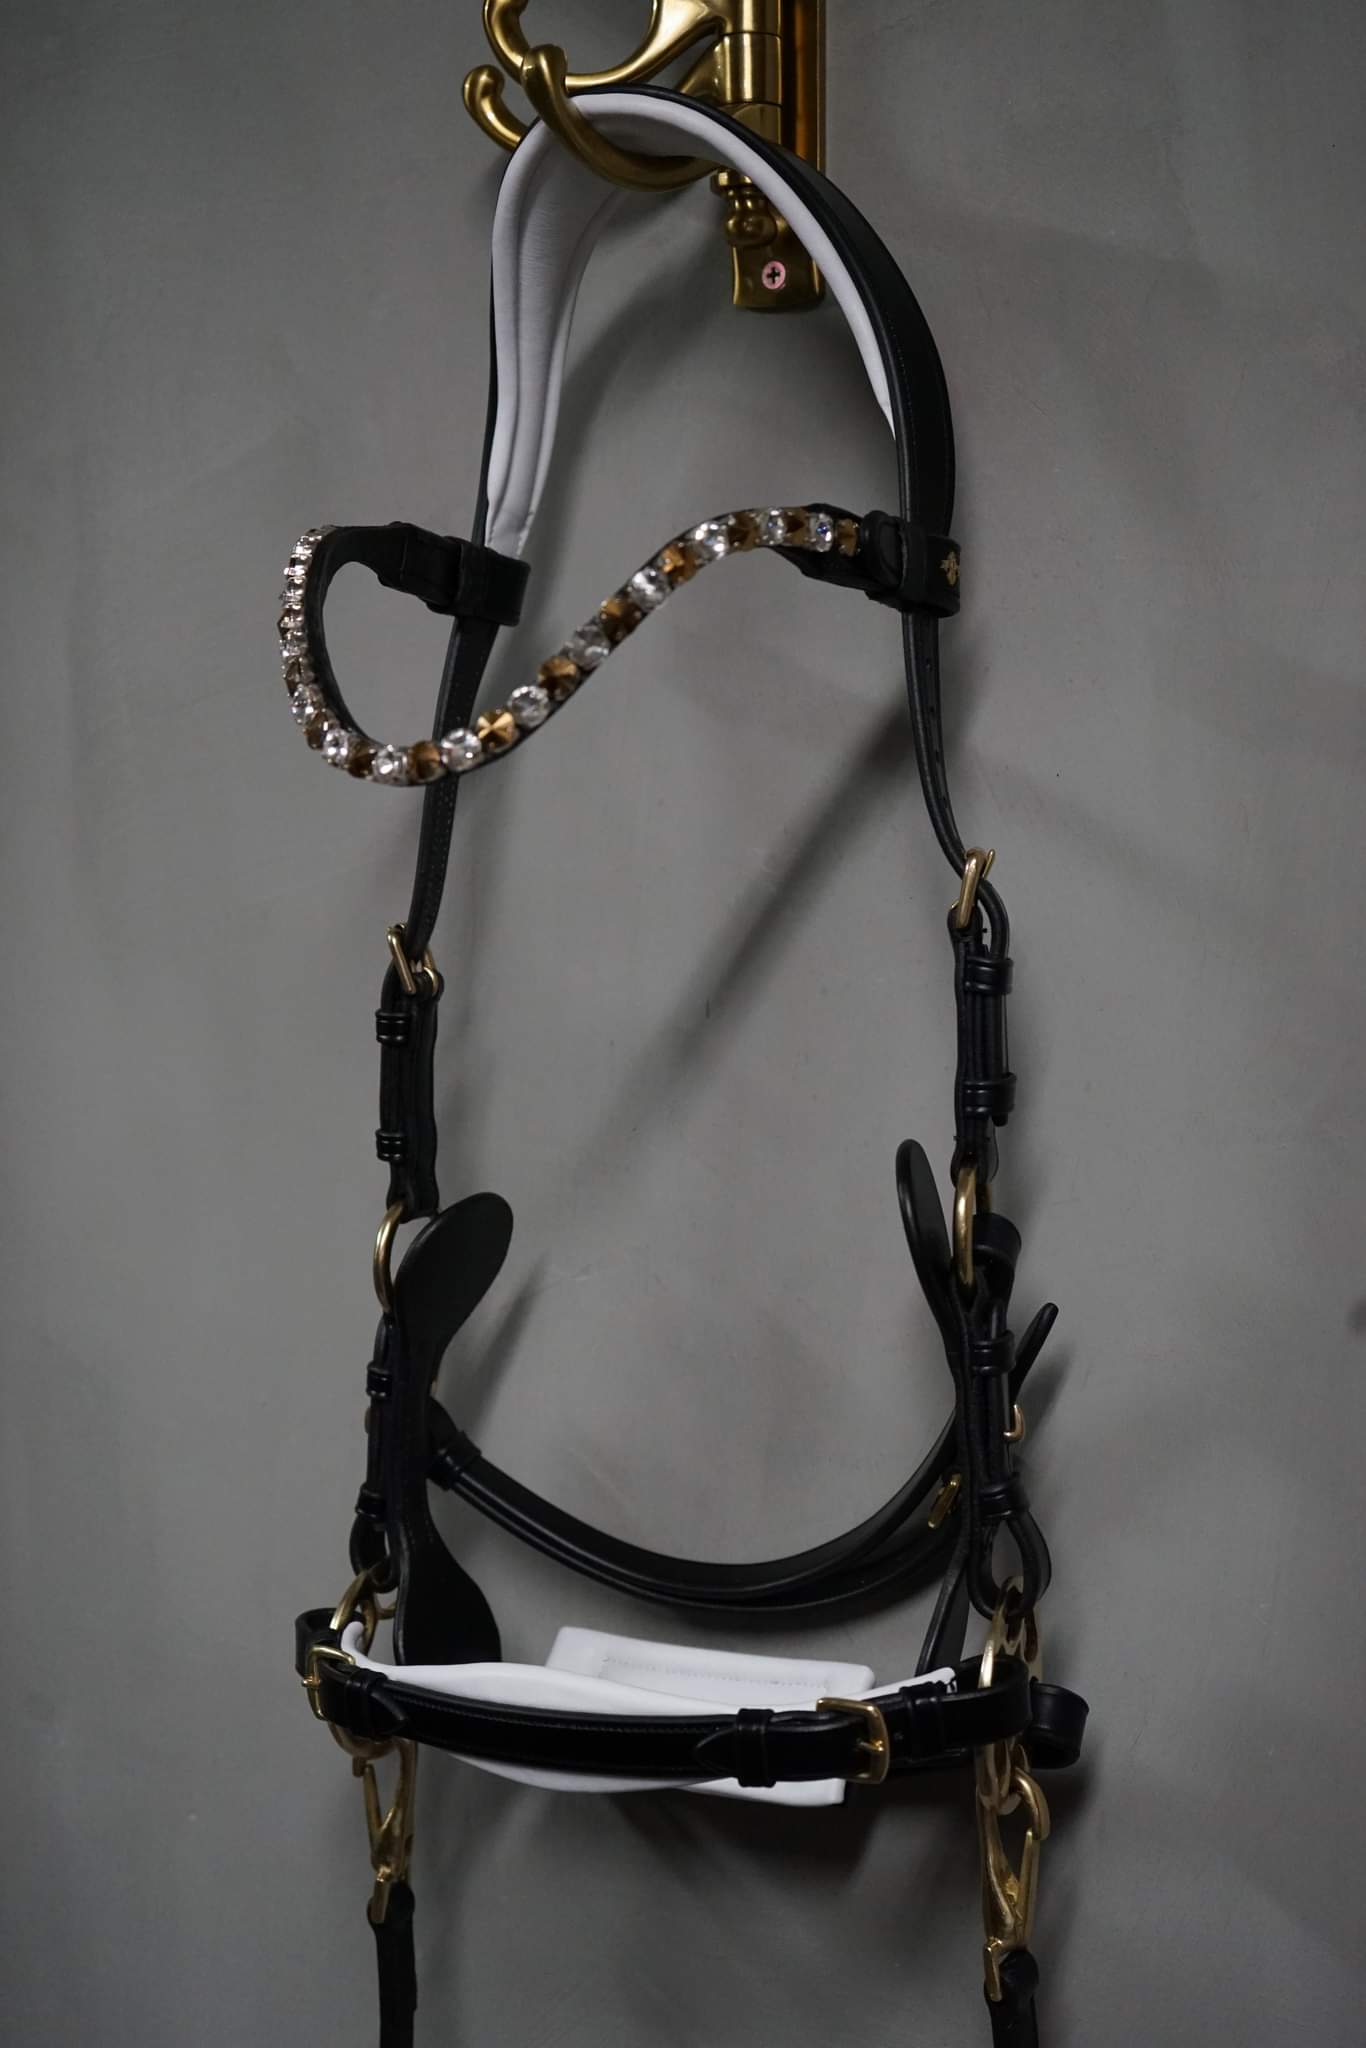 Masego Bella Starwheel Hackamore Bridle - Black and White - Equiluxe Tack